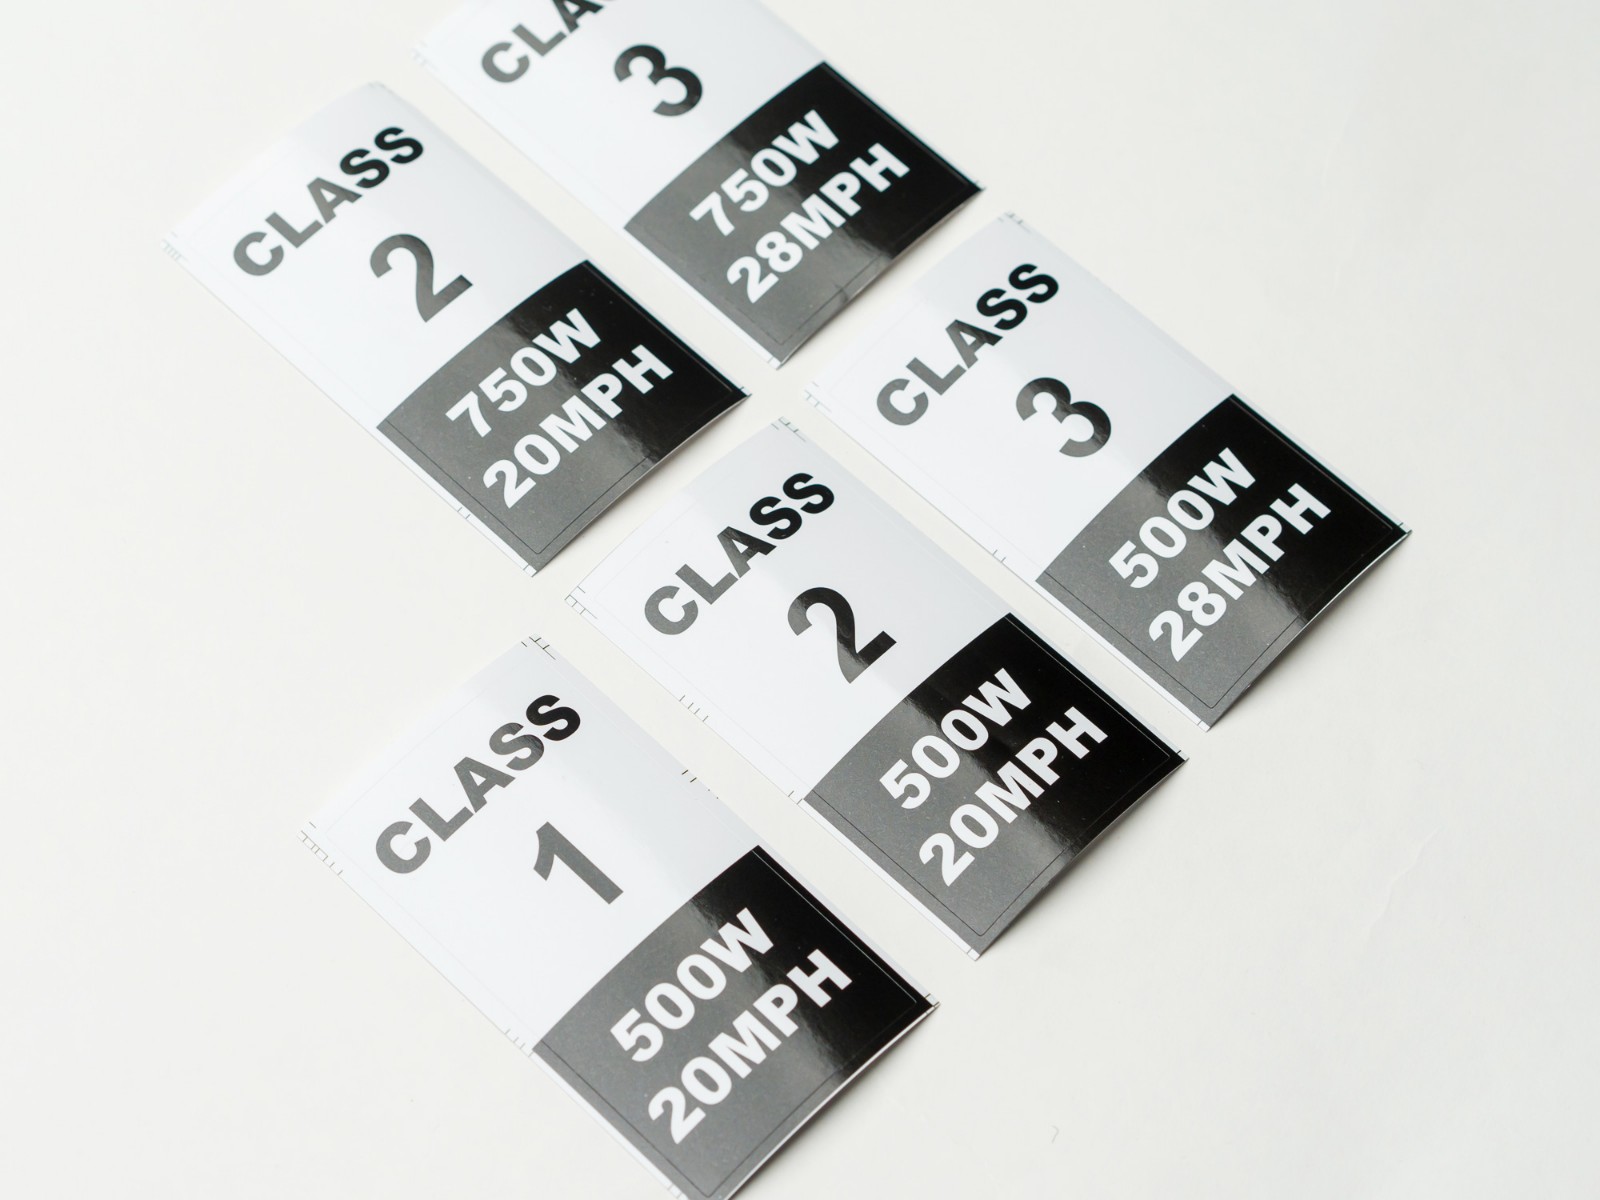 Ebike Frame Identification Class Number Stickers